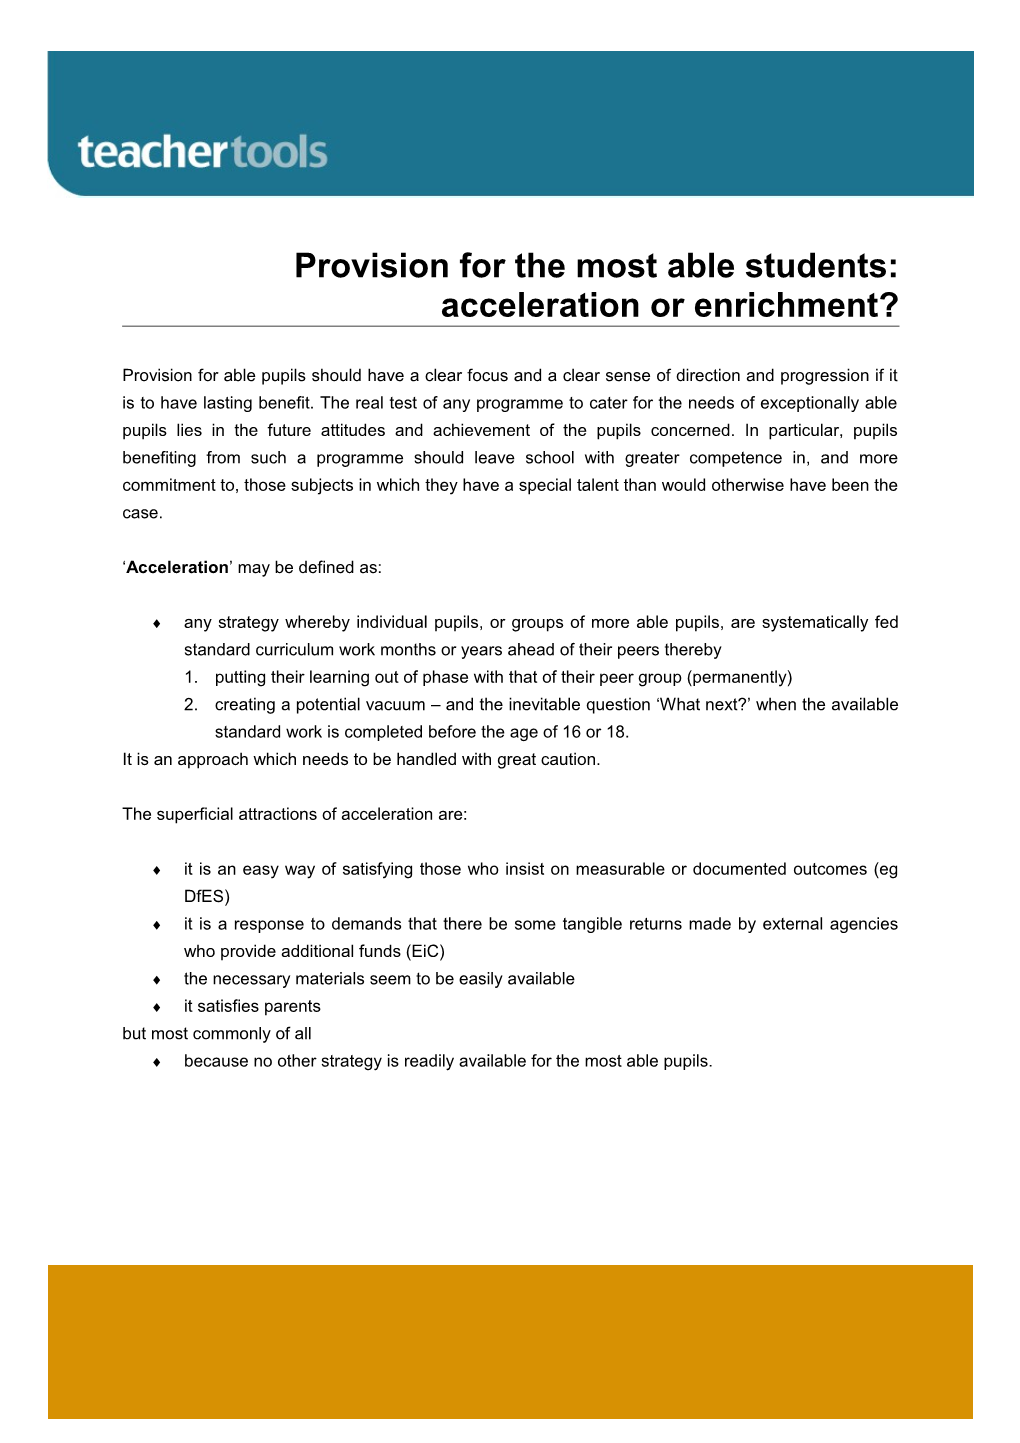 Provision for the Most Able Students: Acceleration Or Enrichment?